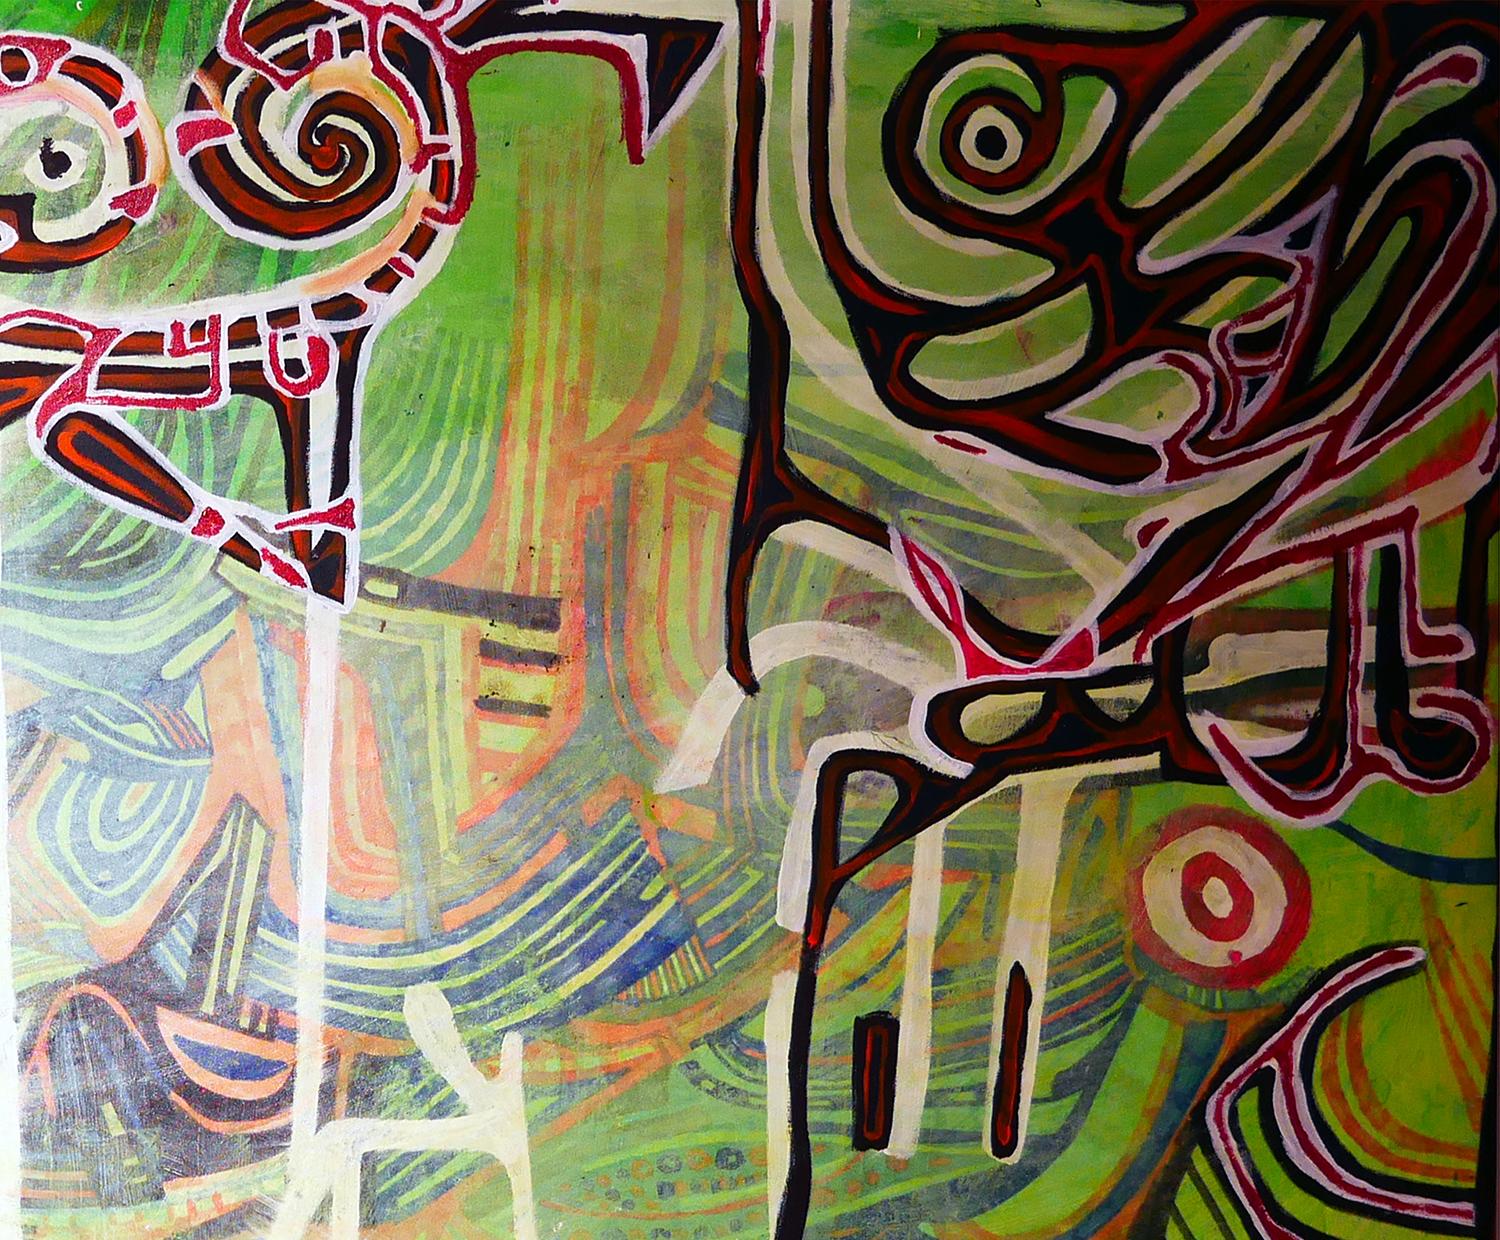 Green and red abstract contemporary painting by Houston, TX artist Michael Abramowitz. This painting depicts abstract patterns such as curves, swirls, and geometric lines against a green background. The red accents on this piece are a standout!